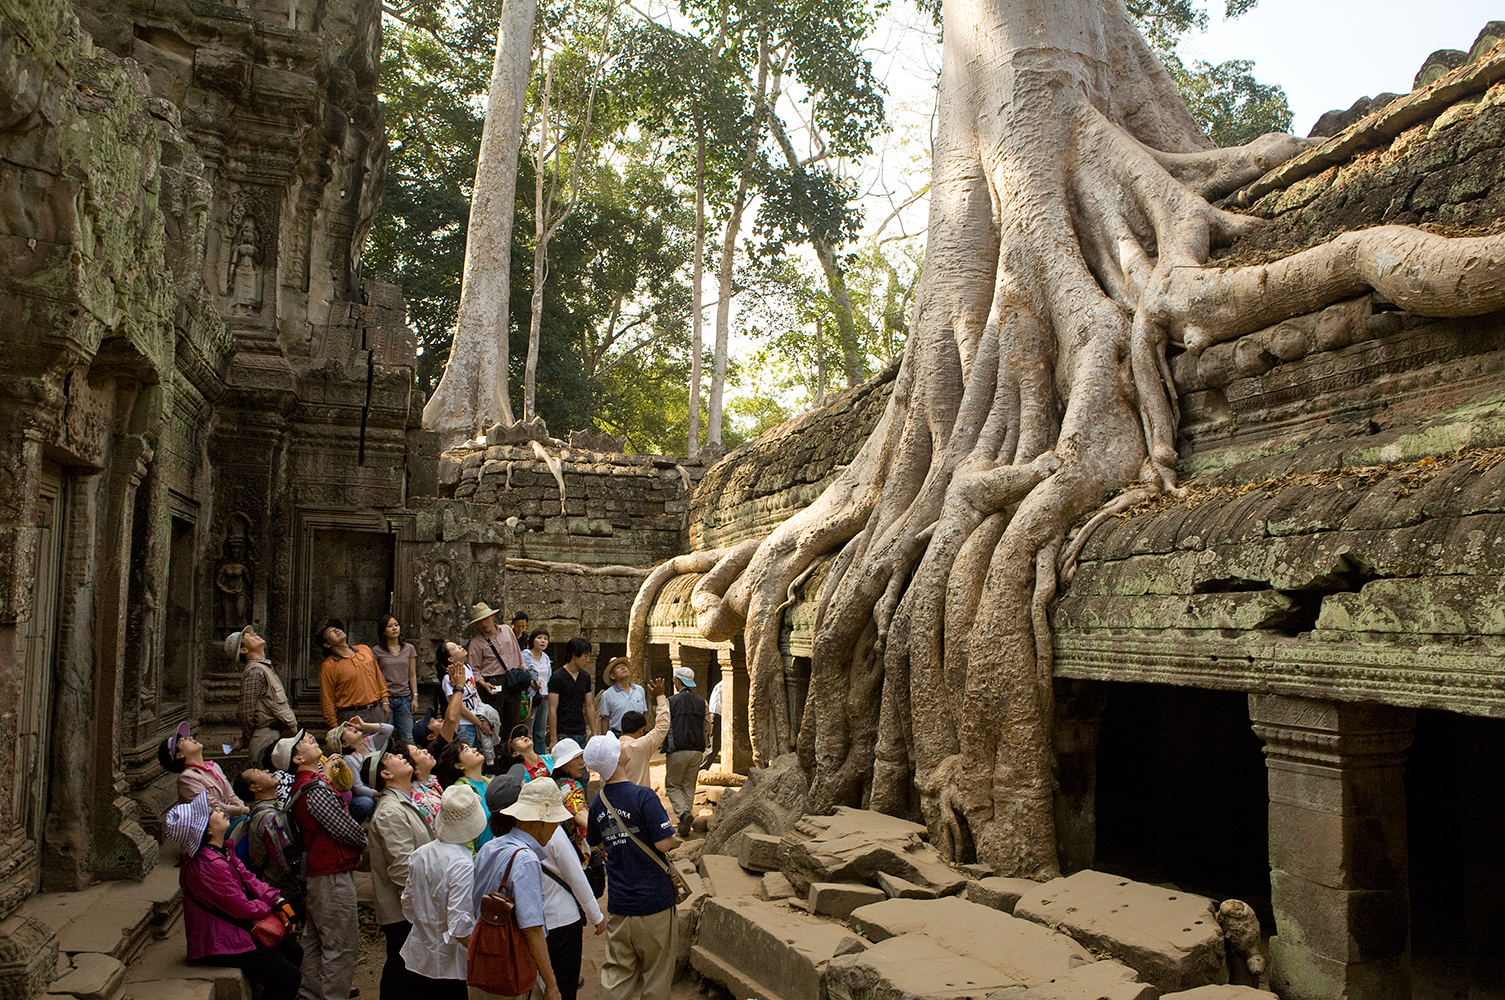  A tour group listens as their guide describes a tree at Ta Prohm temple, Angkor, Cambodia. 